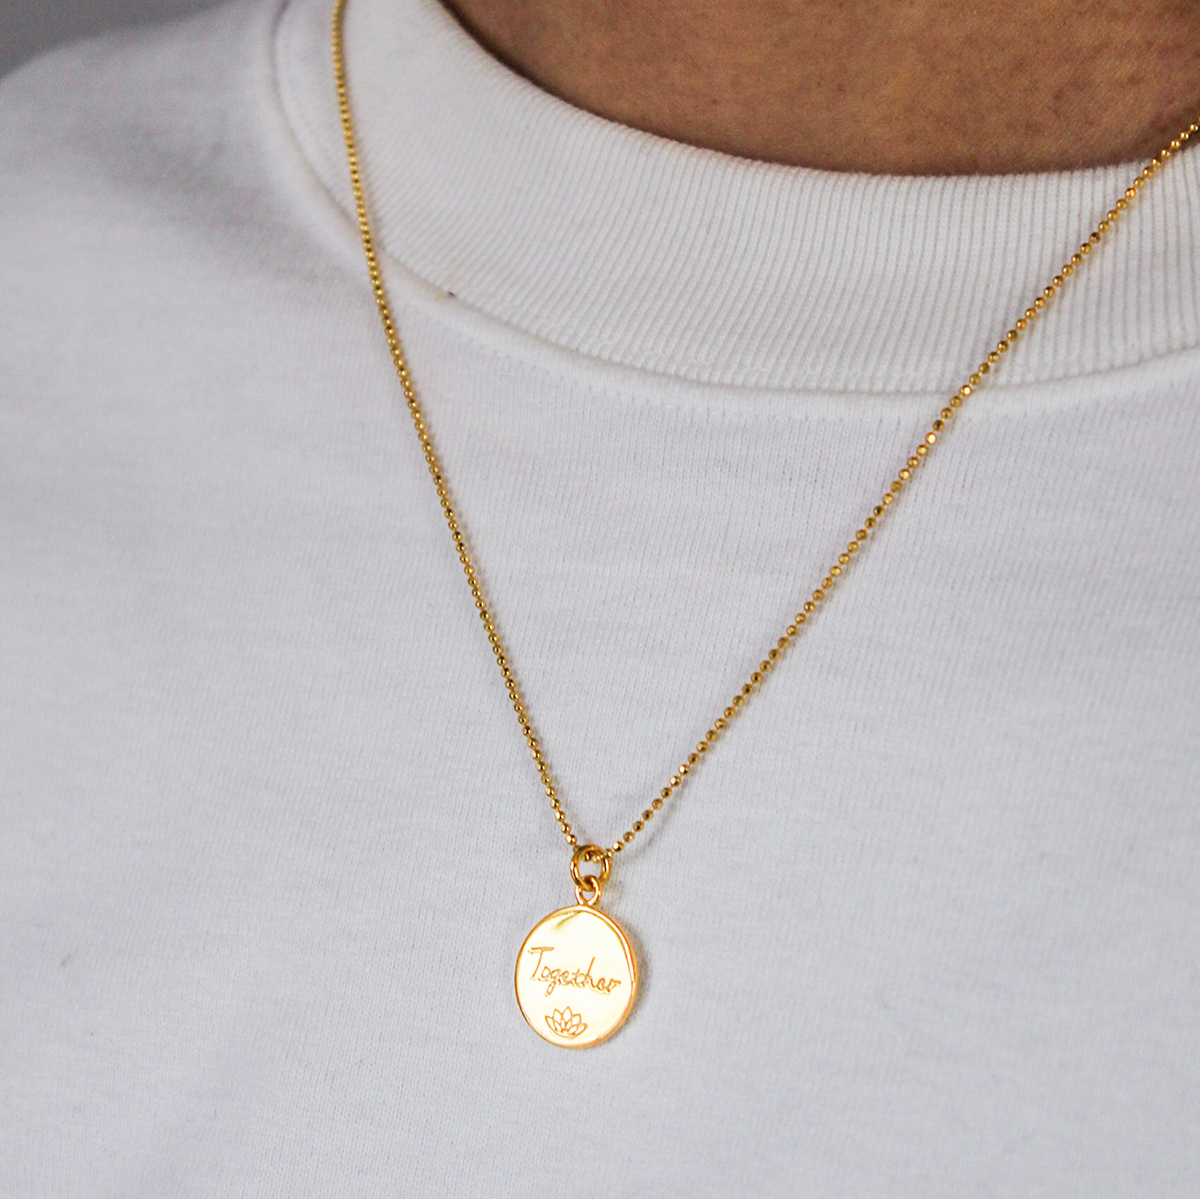 Gold Together - Think Equal Charity necklace